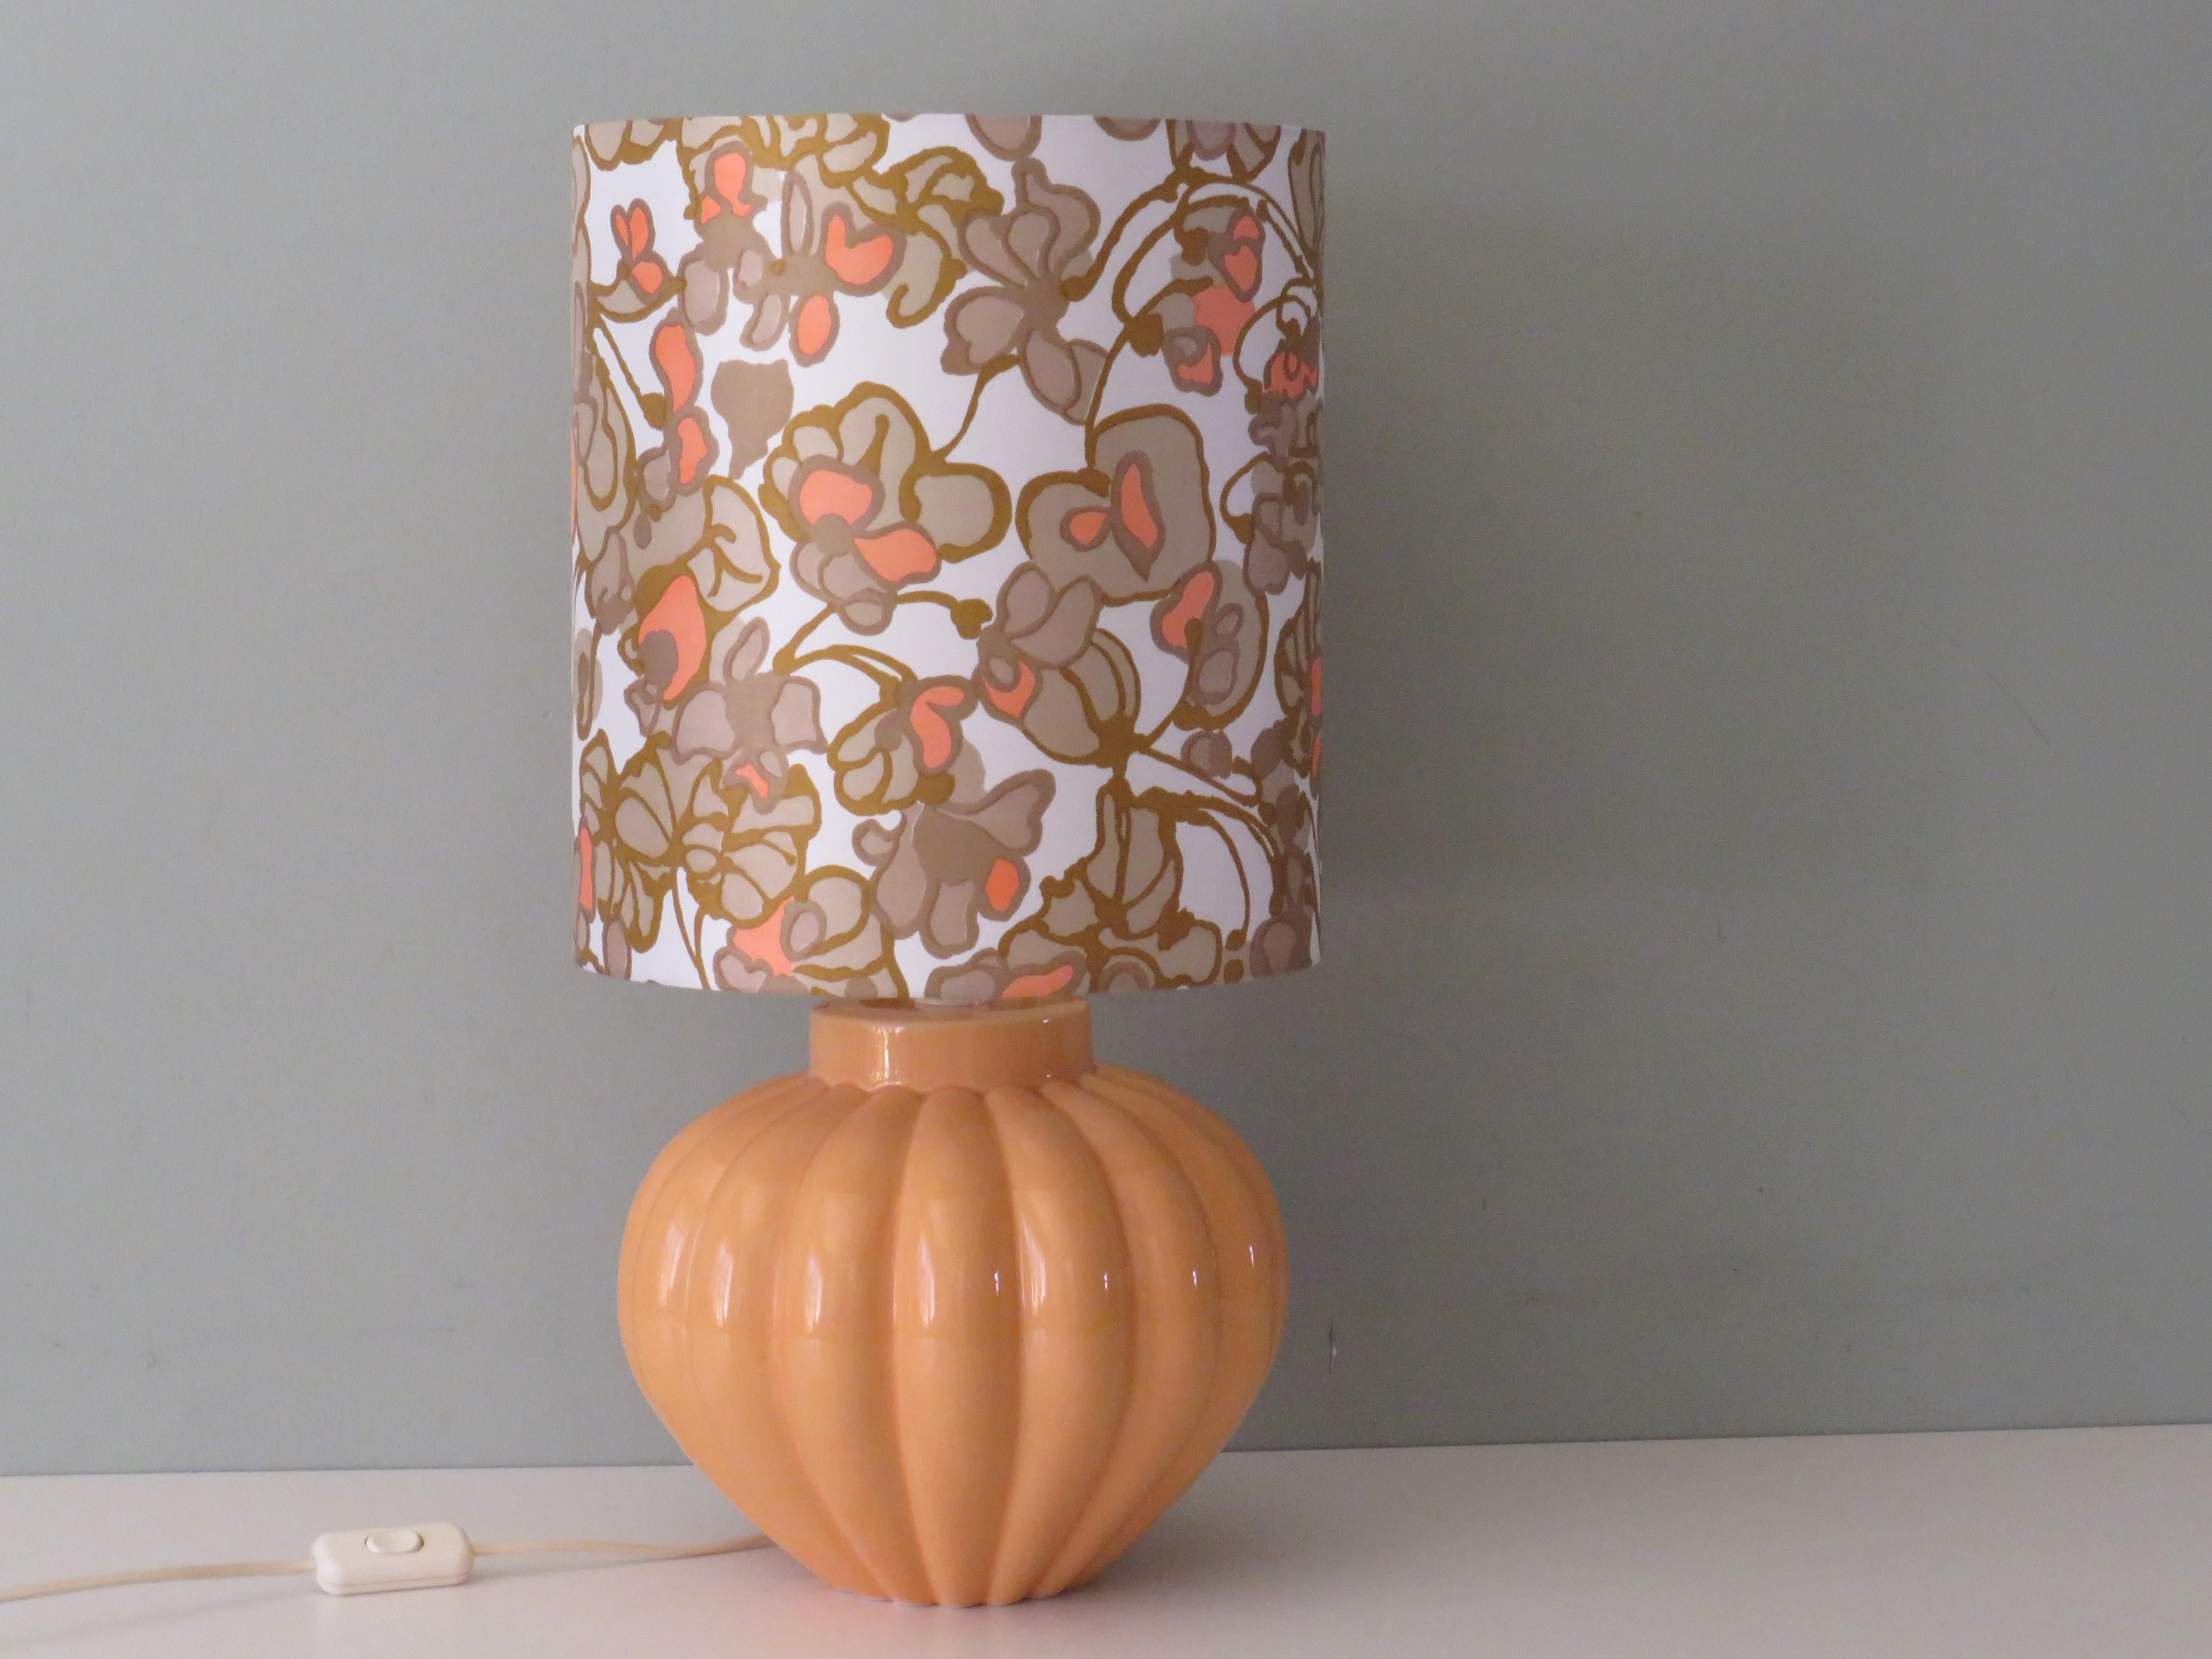 Ribbed ceramic lamp base with a handmade lampshade from a silky vintage fabric.
The lamp has 1 E 27 fitting and white wiring with on and off button.